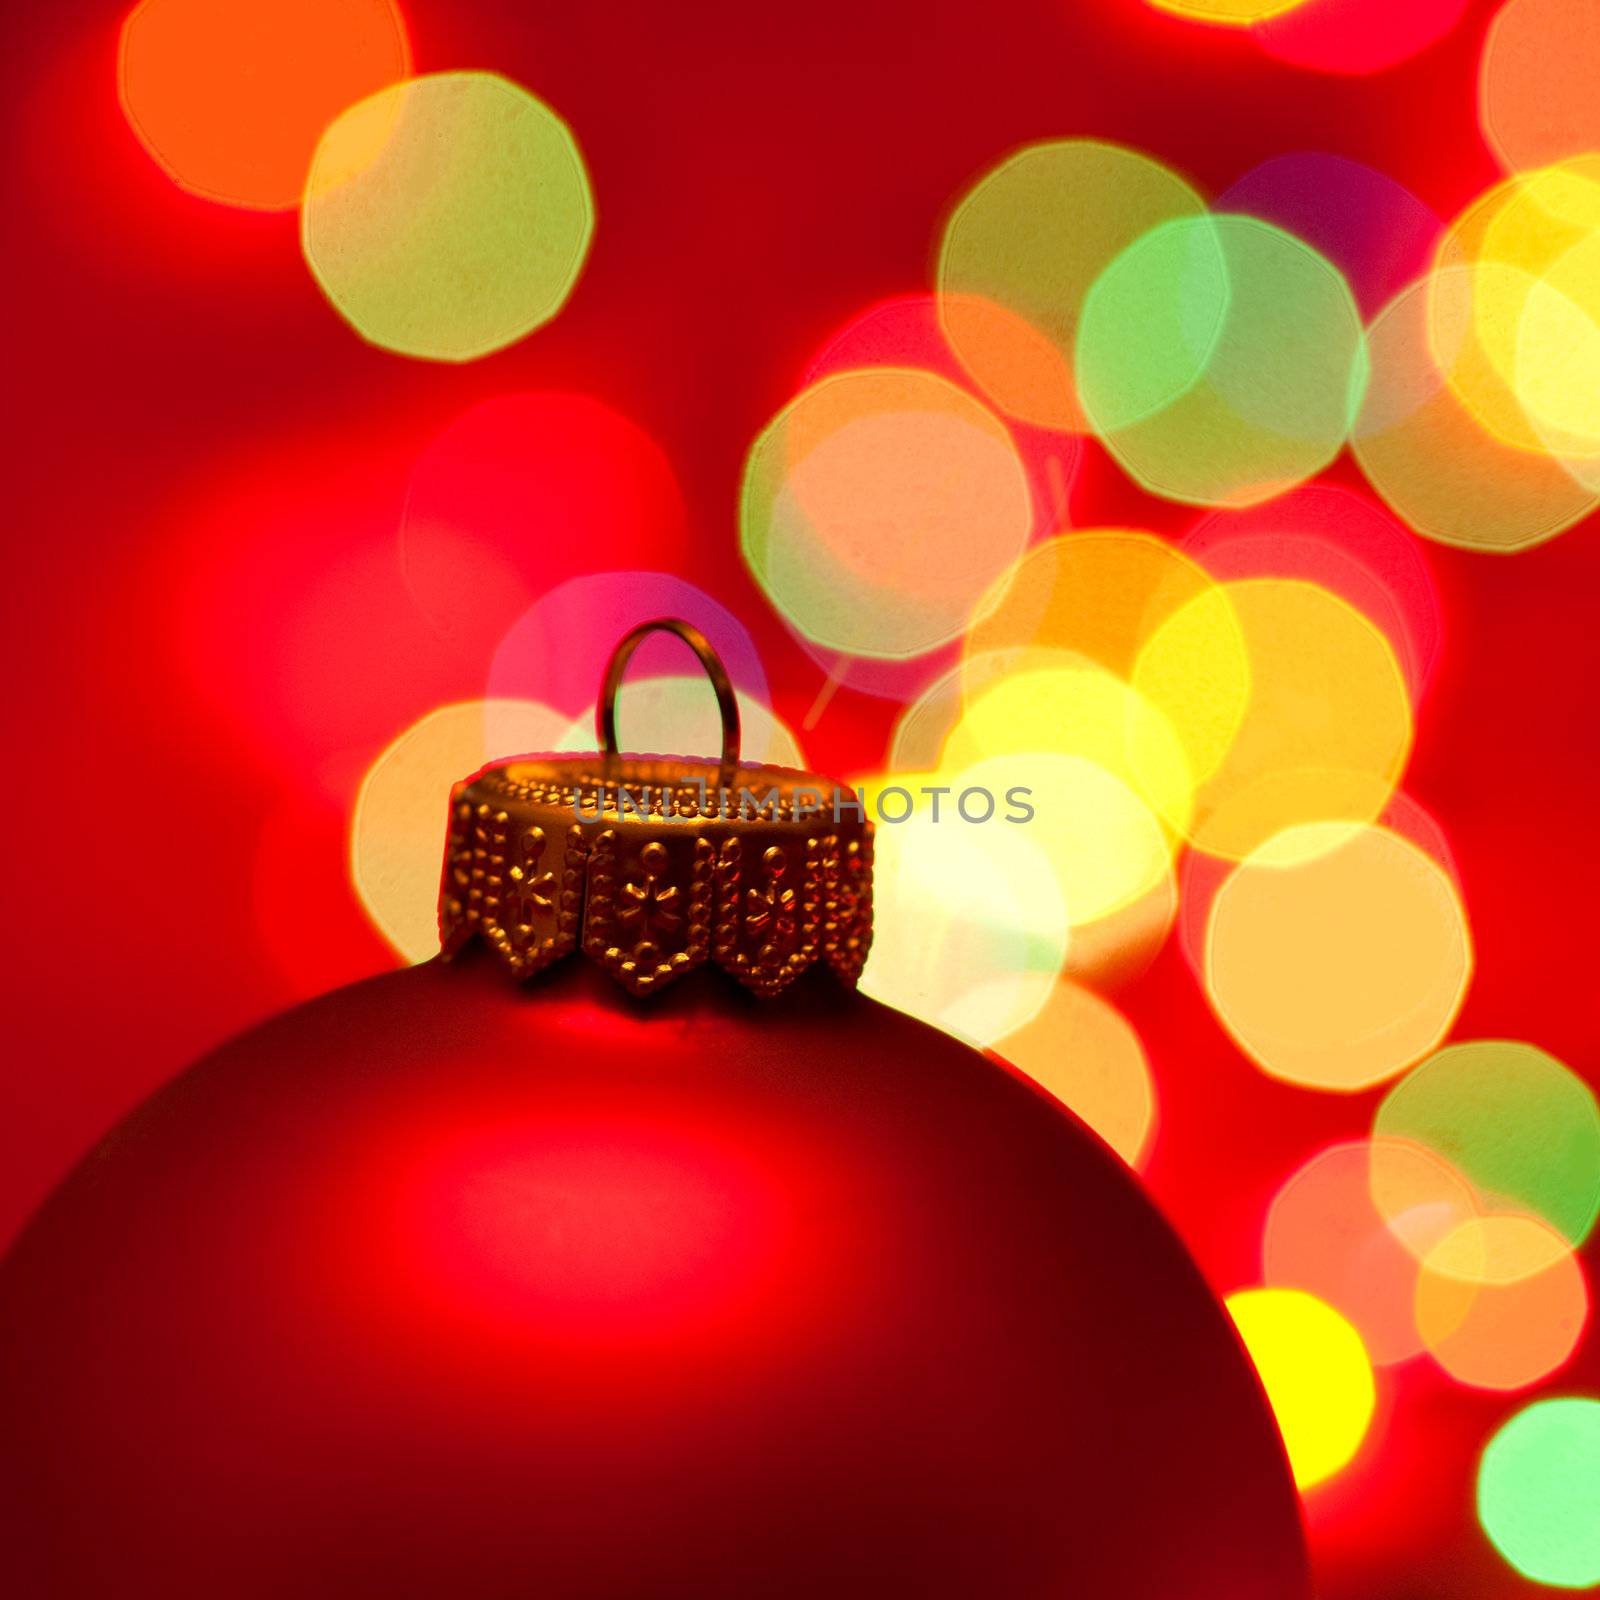 Christmas bauble by naumoid